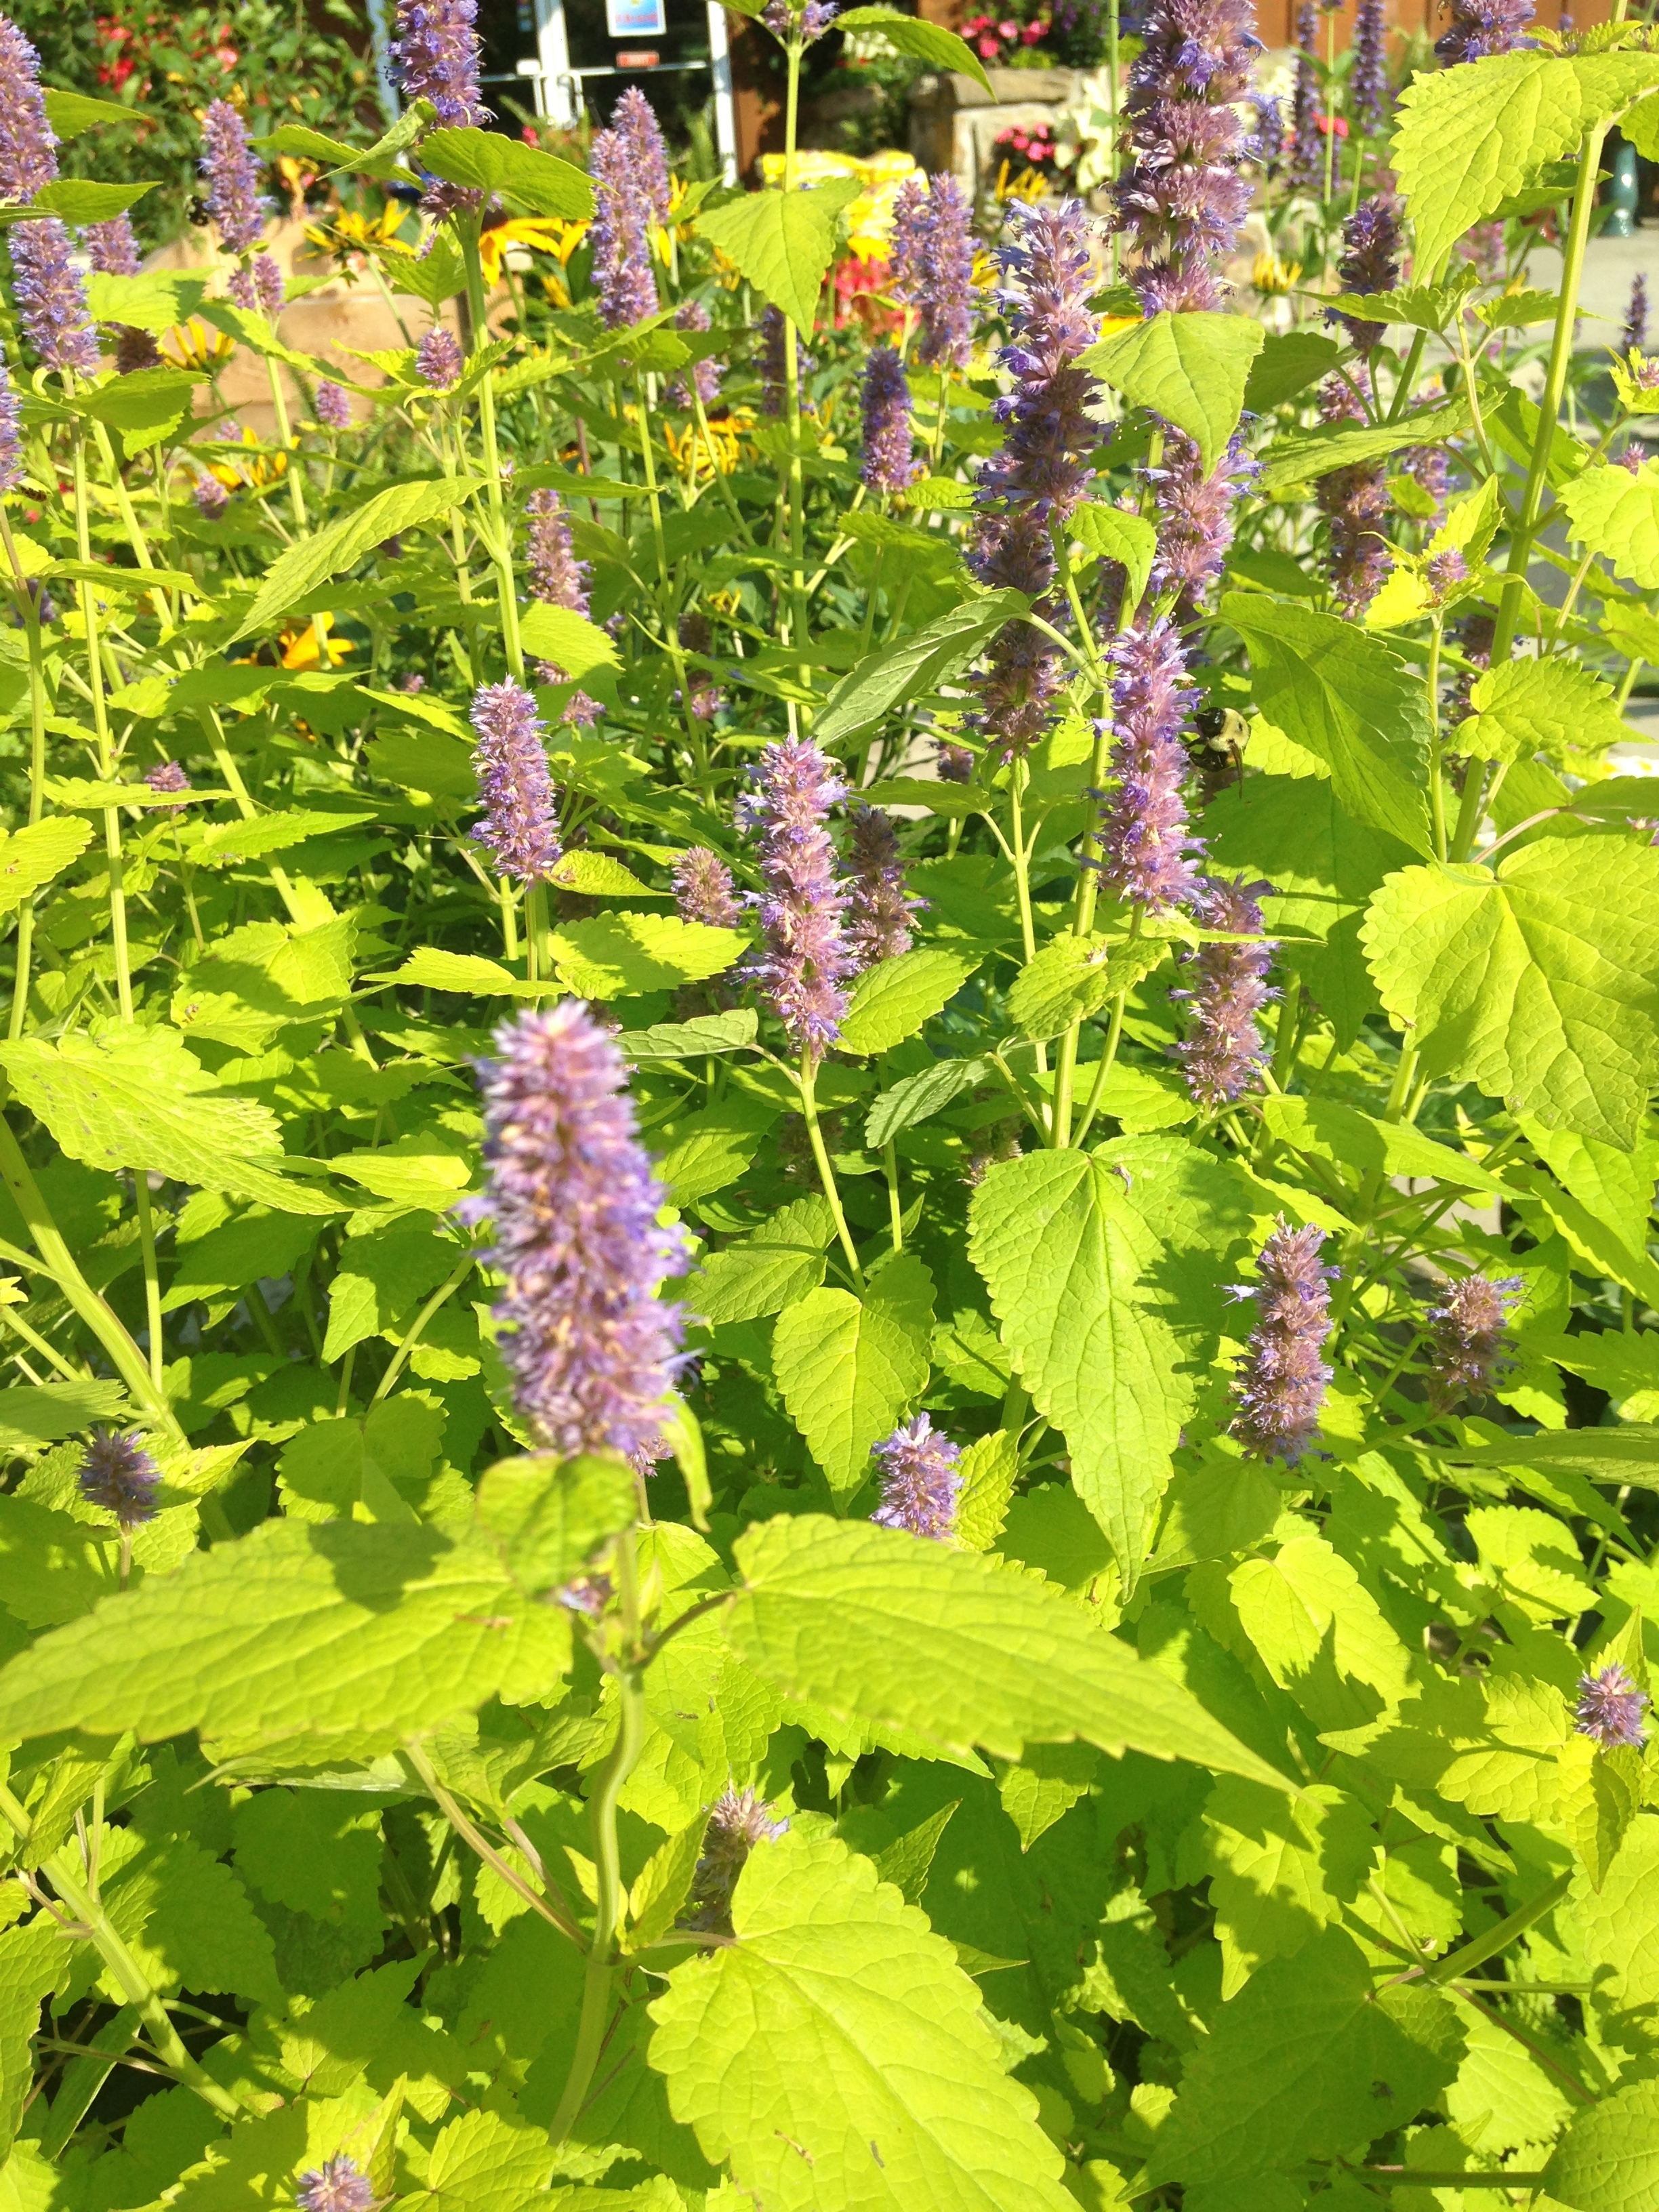 Agastache 'Golden Jubilee' this summer bloomer is a standout with its char trues leaves ad purple blooms. Its hard to beat in the smmer, and does best with division every 3-5 years.